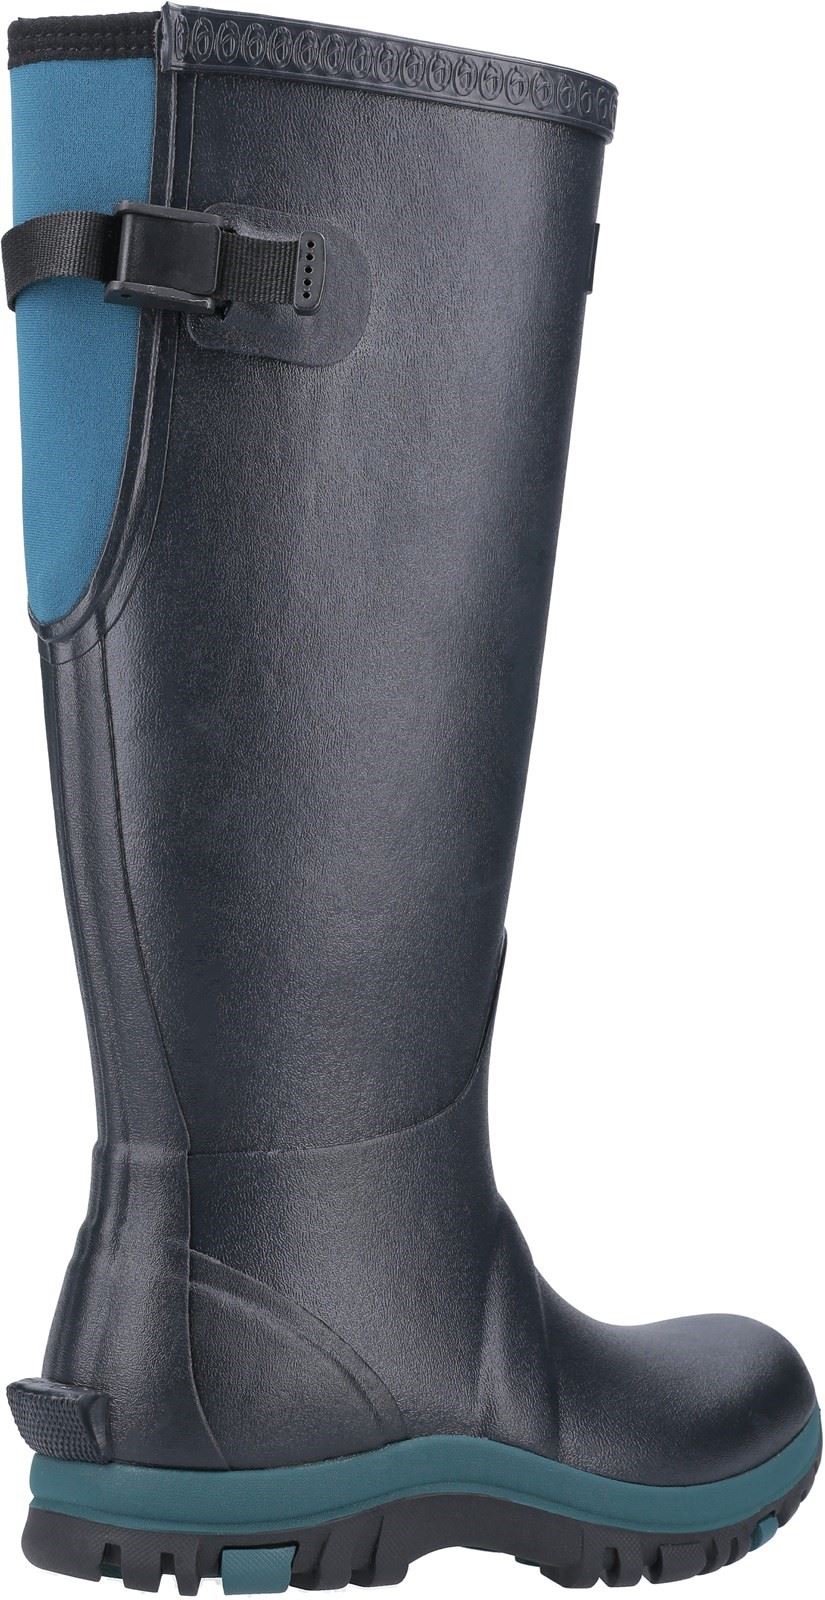 Cotswold Realm Adjustable Wellington Boots